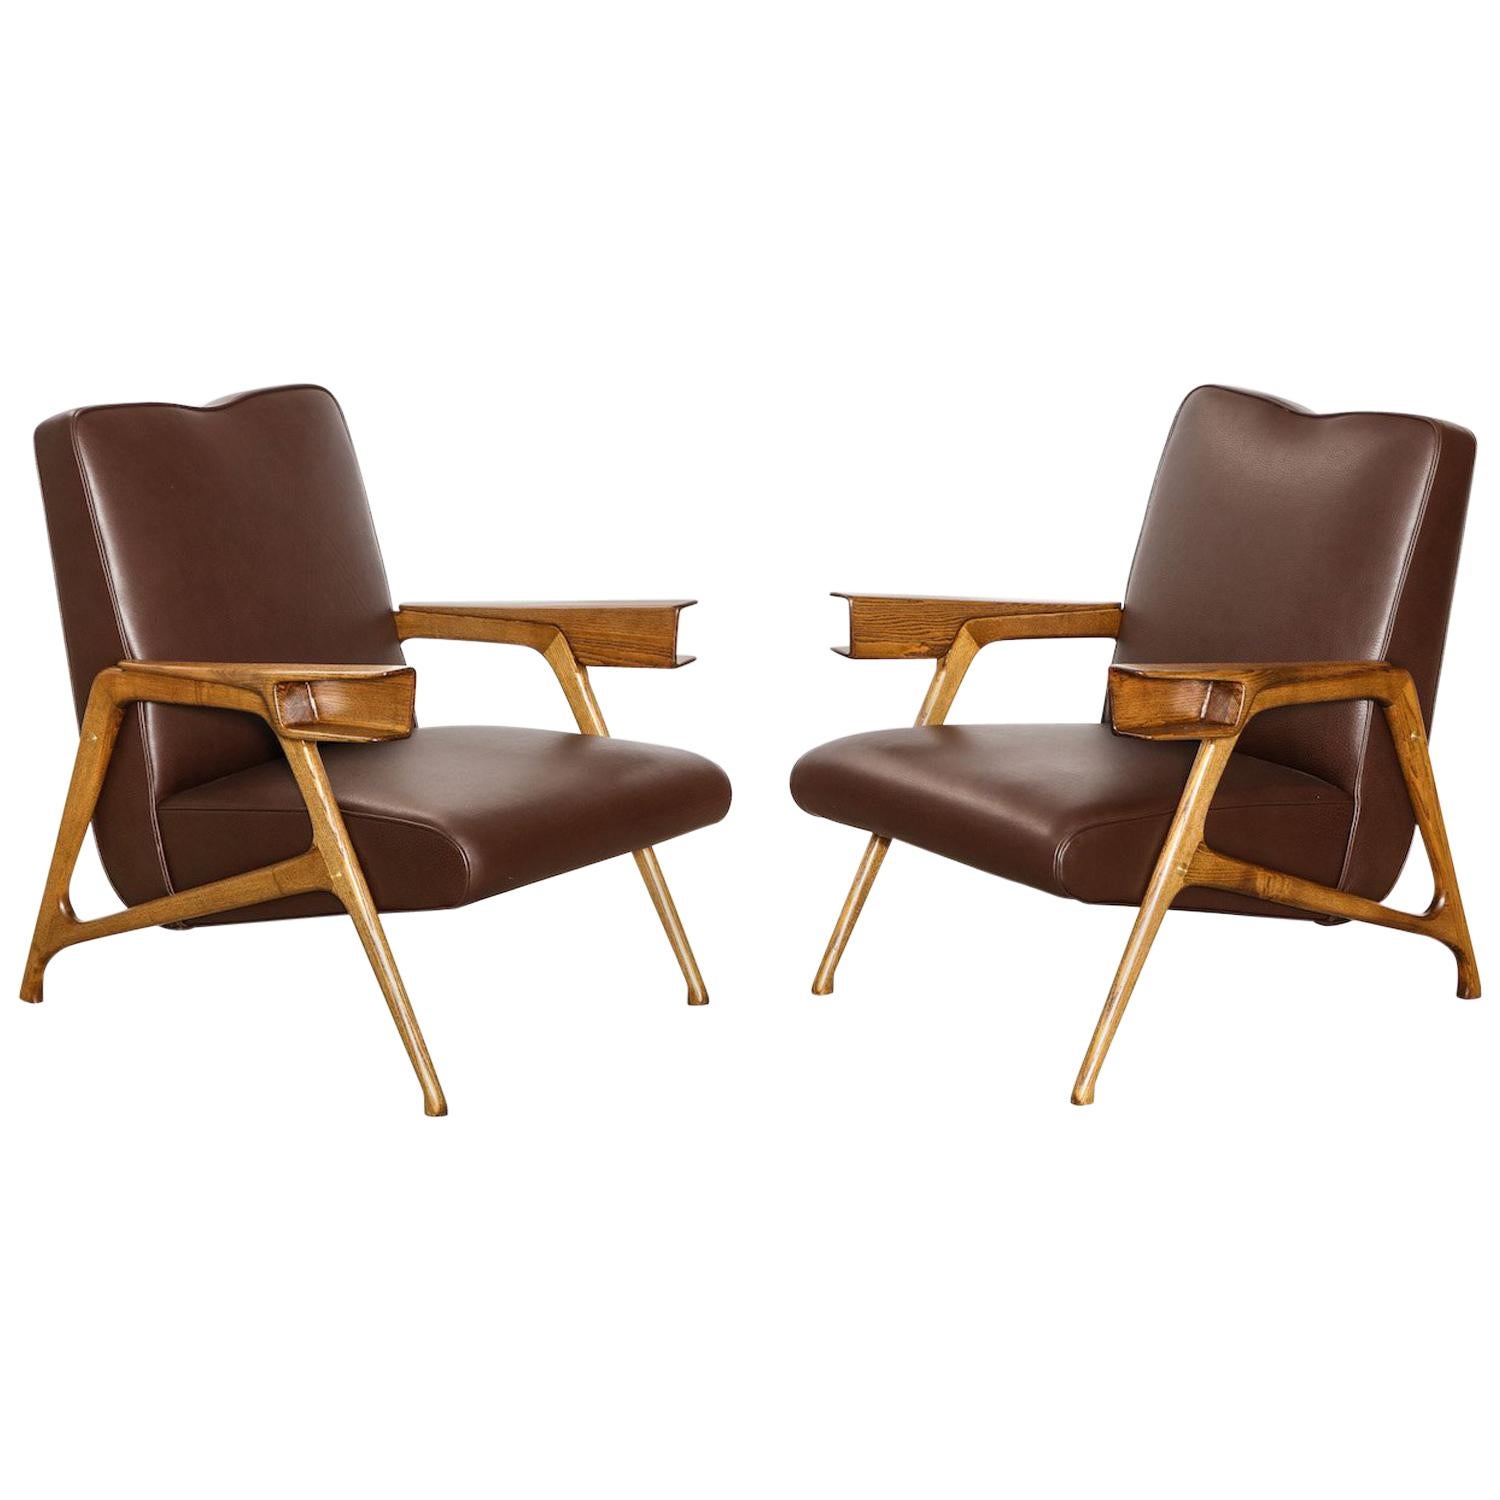 Architectural Lounge Chairs Attributed to Augusto Romano